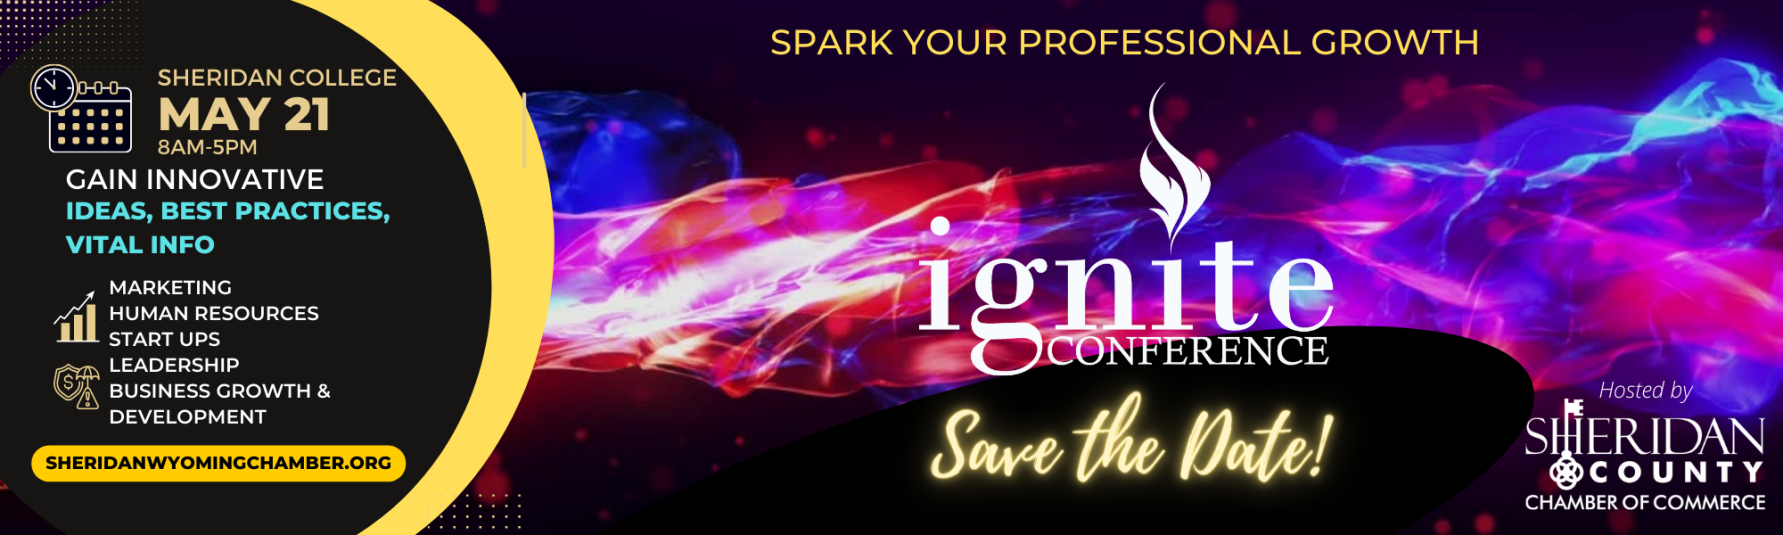 IGNITE CONFERENCE Sheridan County Chamber of Commerce